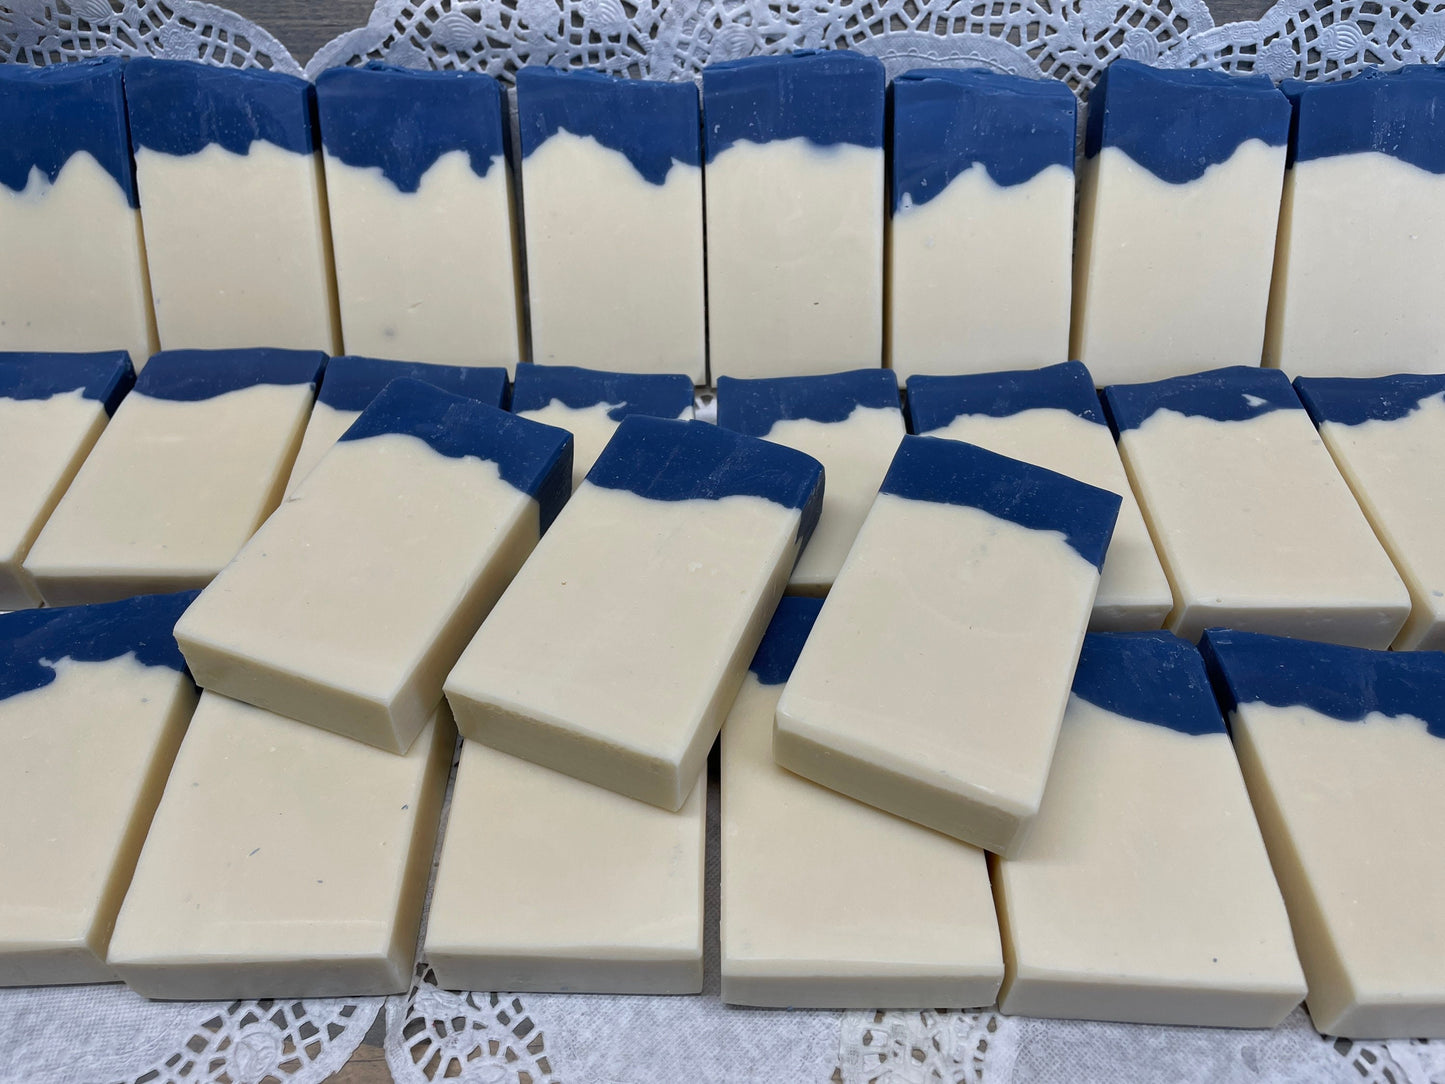 A photo of Aunt Pat’s Soap with a creamy color base, topped with a royal blue color